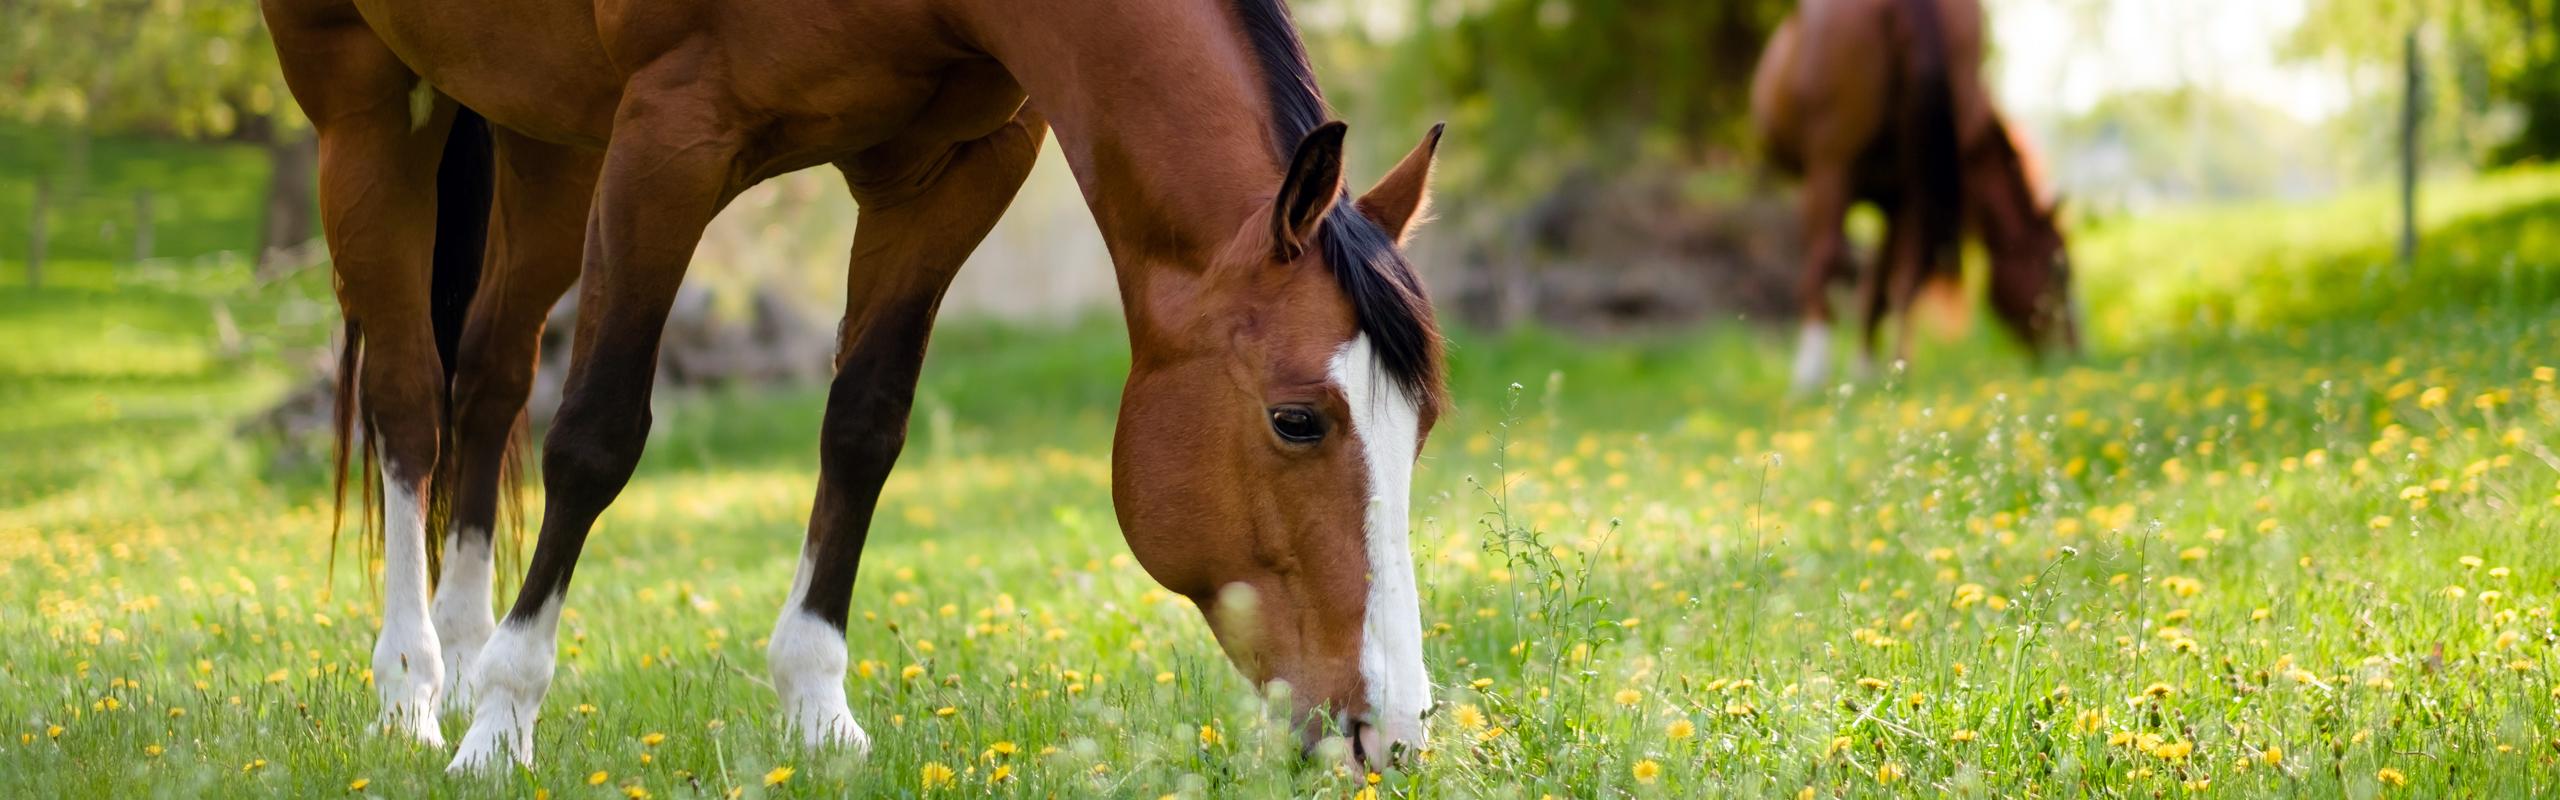 Horse eating and sniffing in a grassy field.